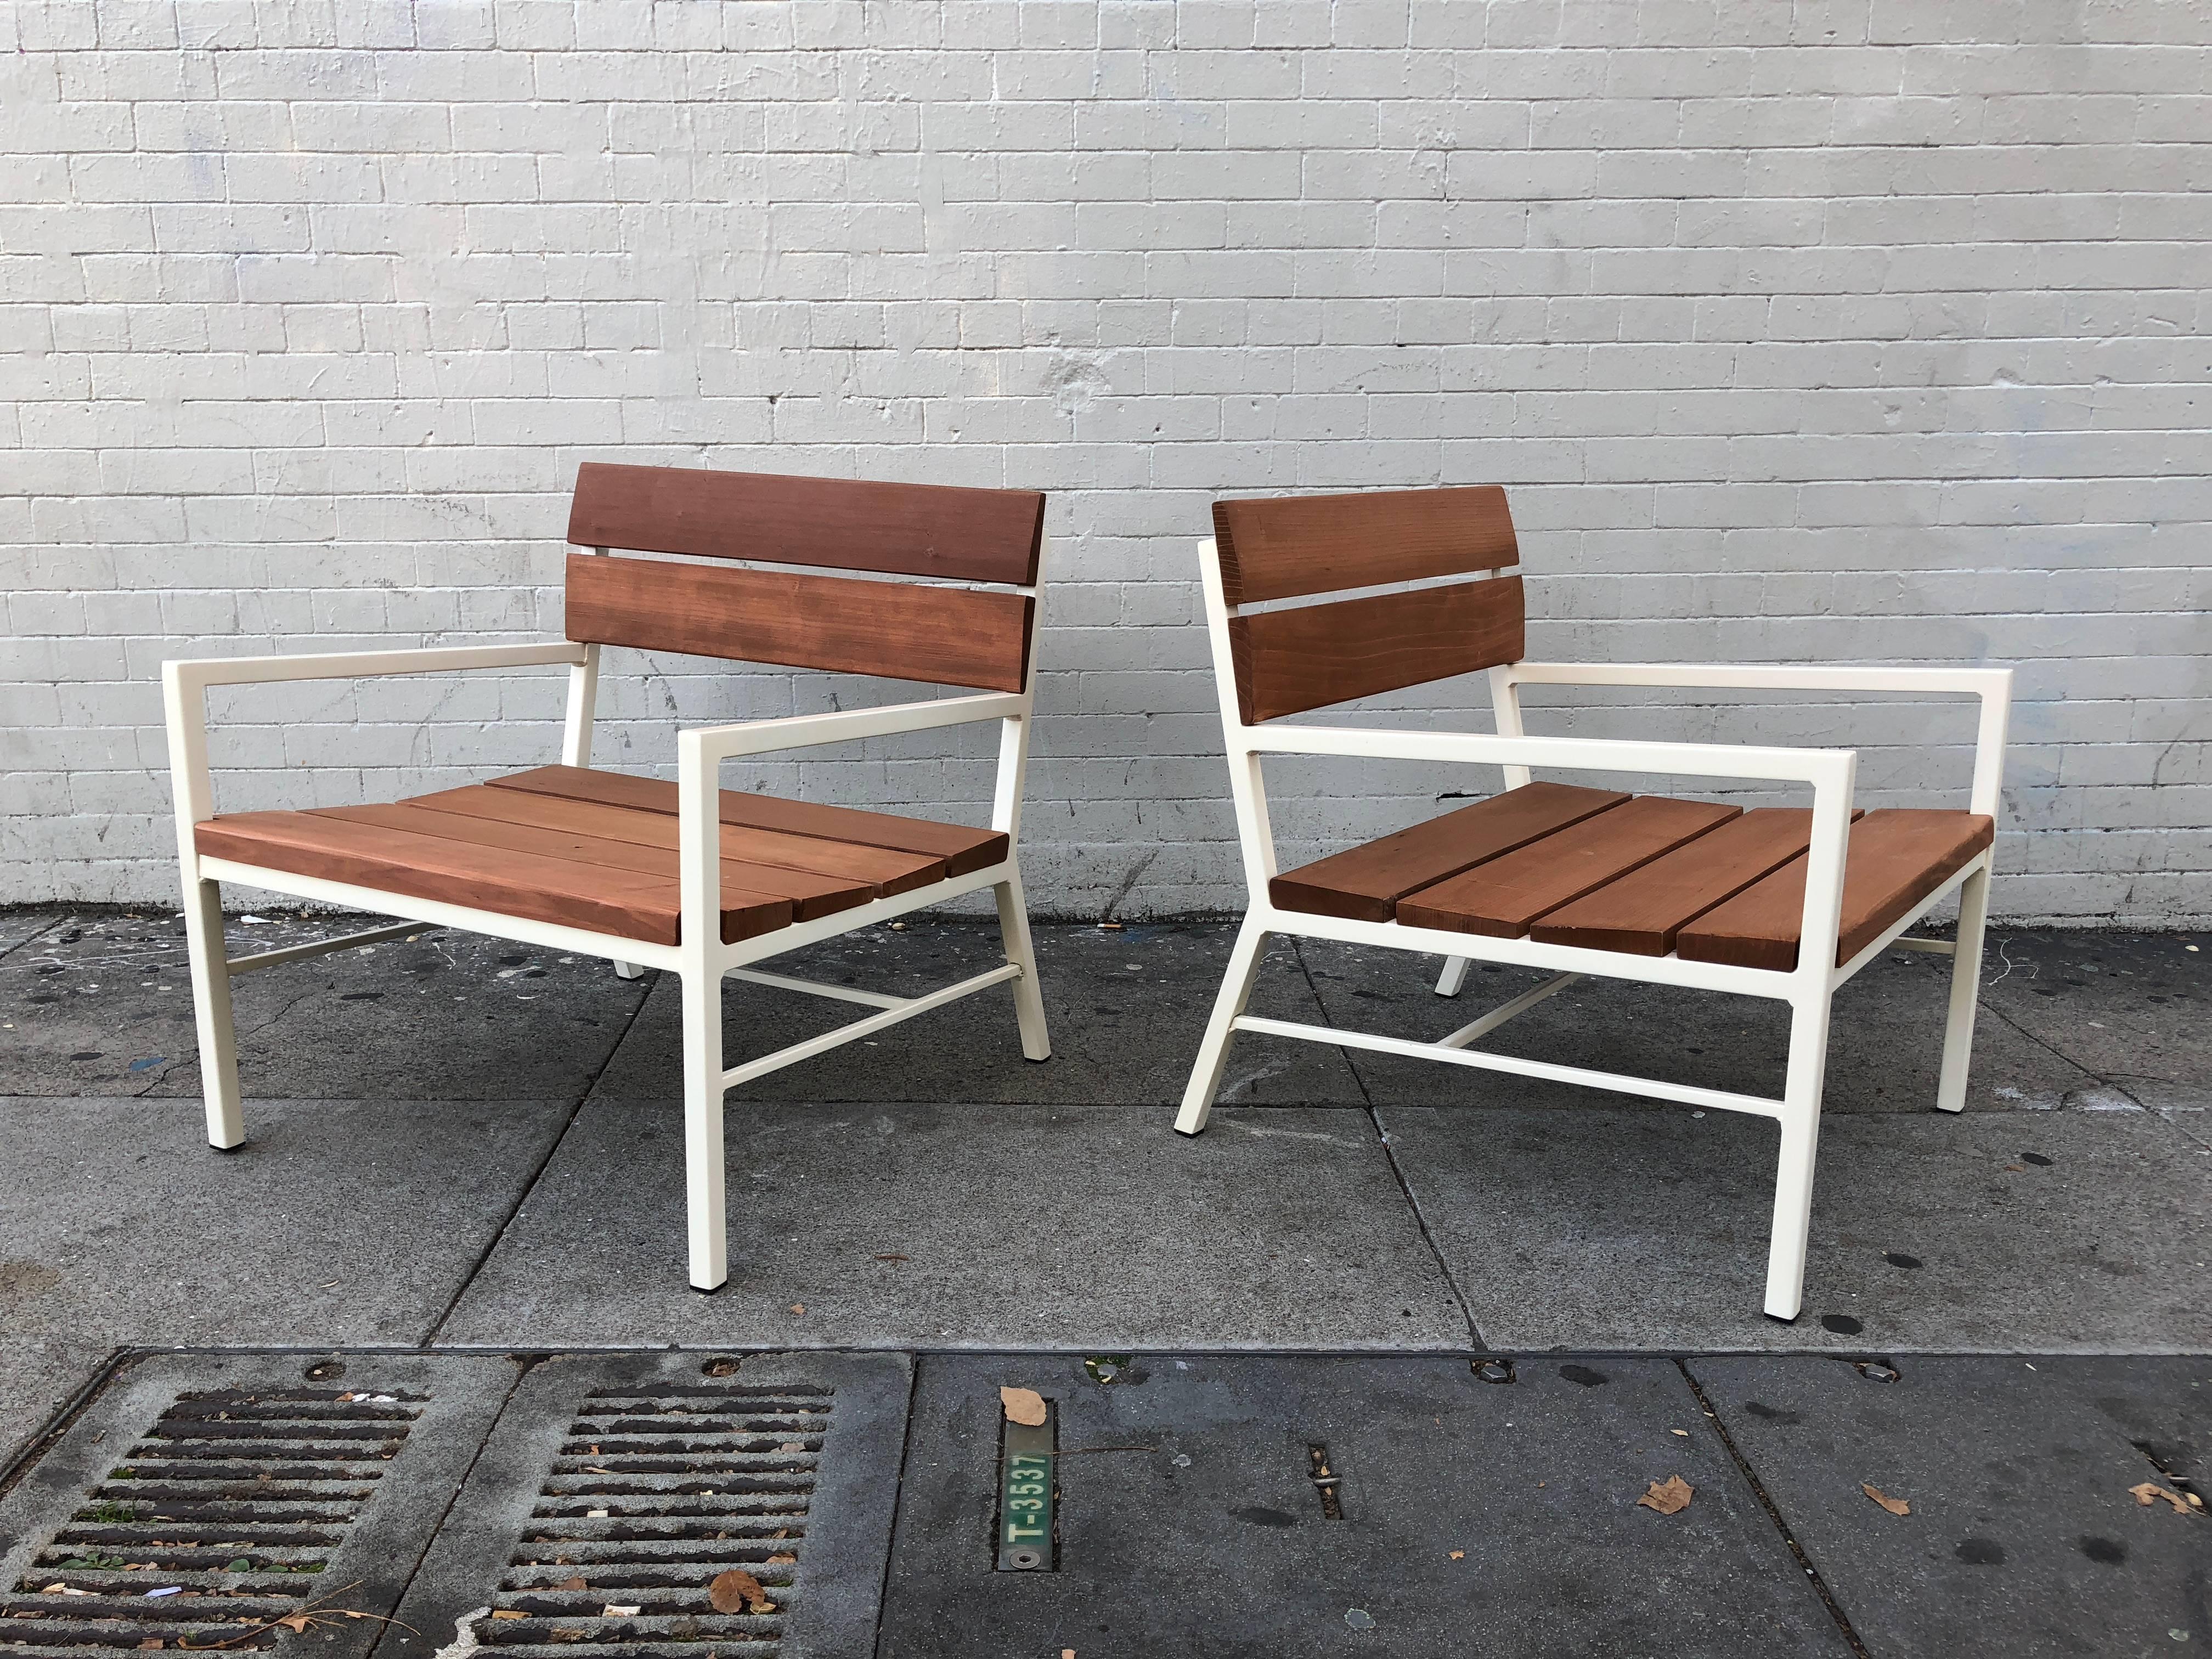 Very rare pair of aluminium and redwood lounge chairs designed by Hendrik Van Keppel and Taylor Green for Brown Jordan. These chairs were made in fairly low numbers, one reason why these chairs almost never surface in the market. The curved seat and